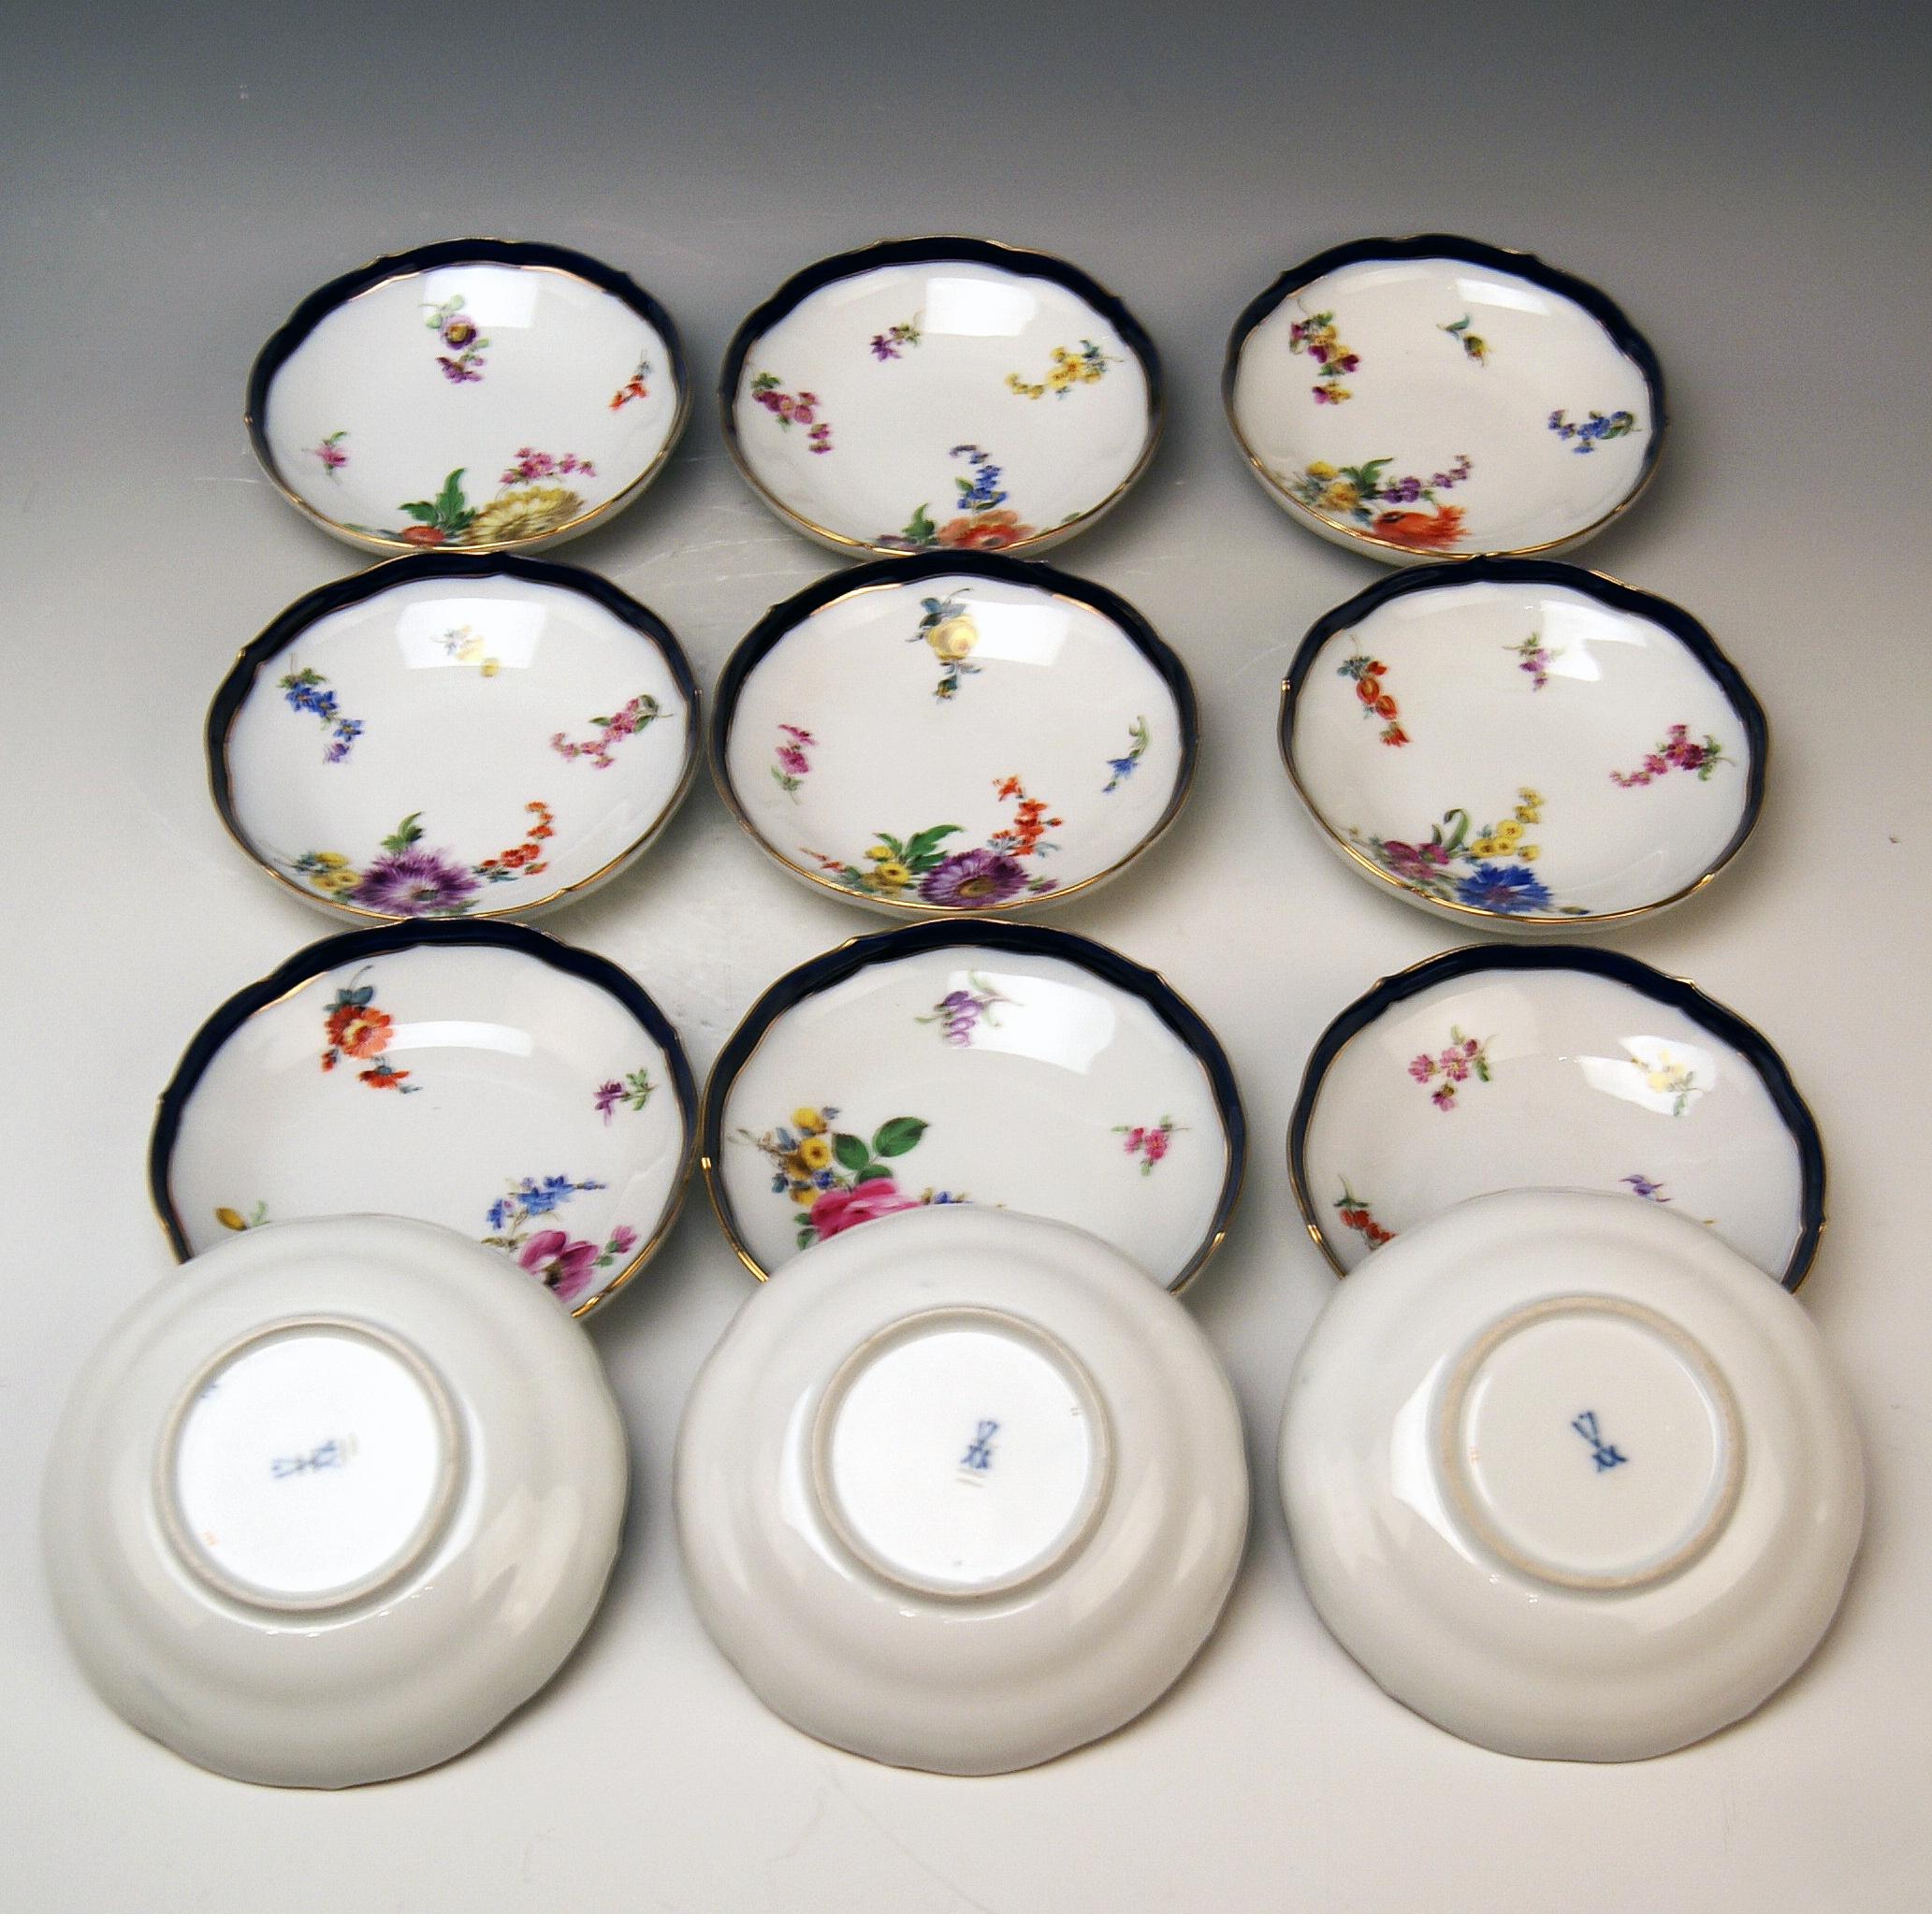 20th Century Meissen Coffee Set Bouquet Nr. 051110 12 Persons Pfeiffer Period 1924-1934 For Sale